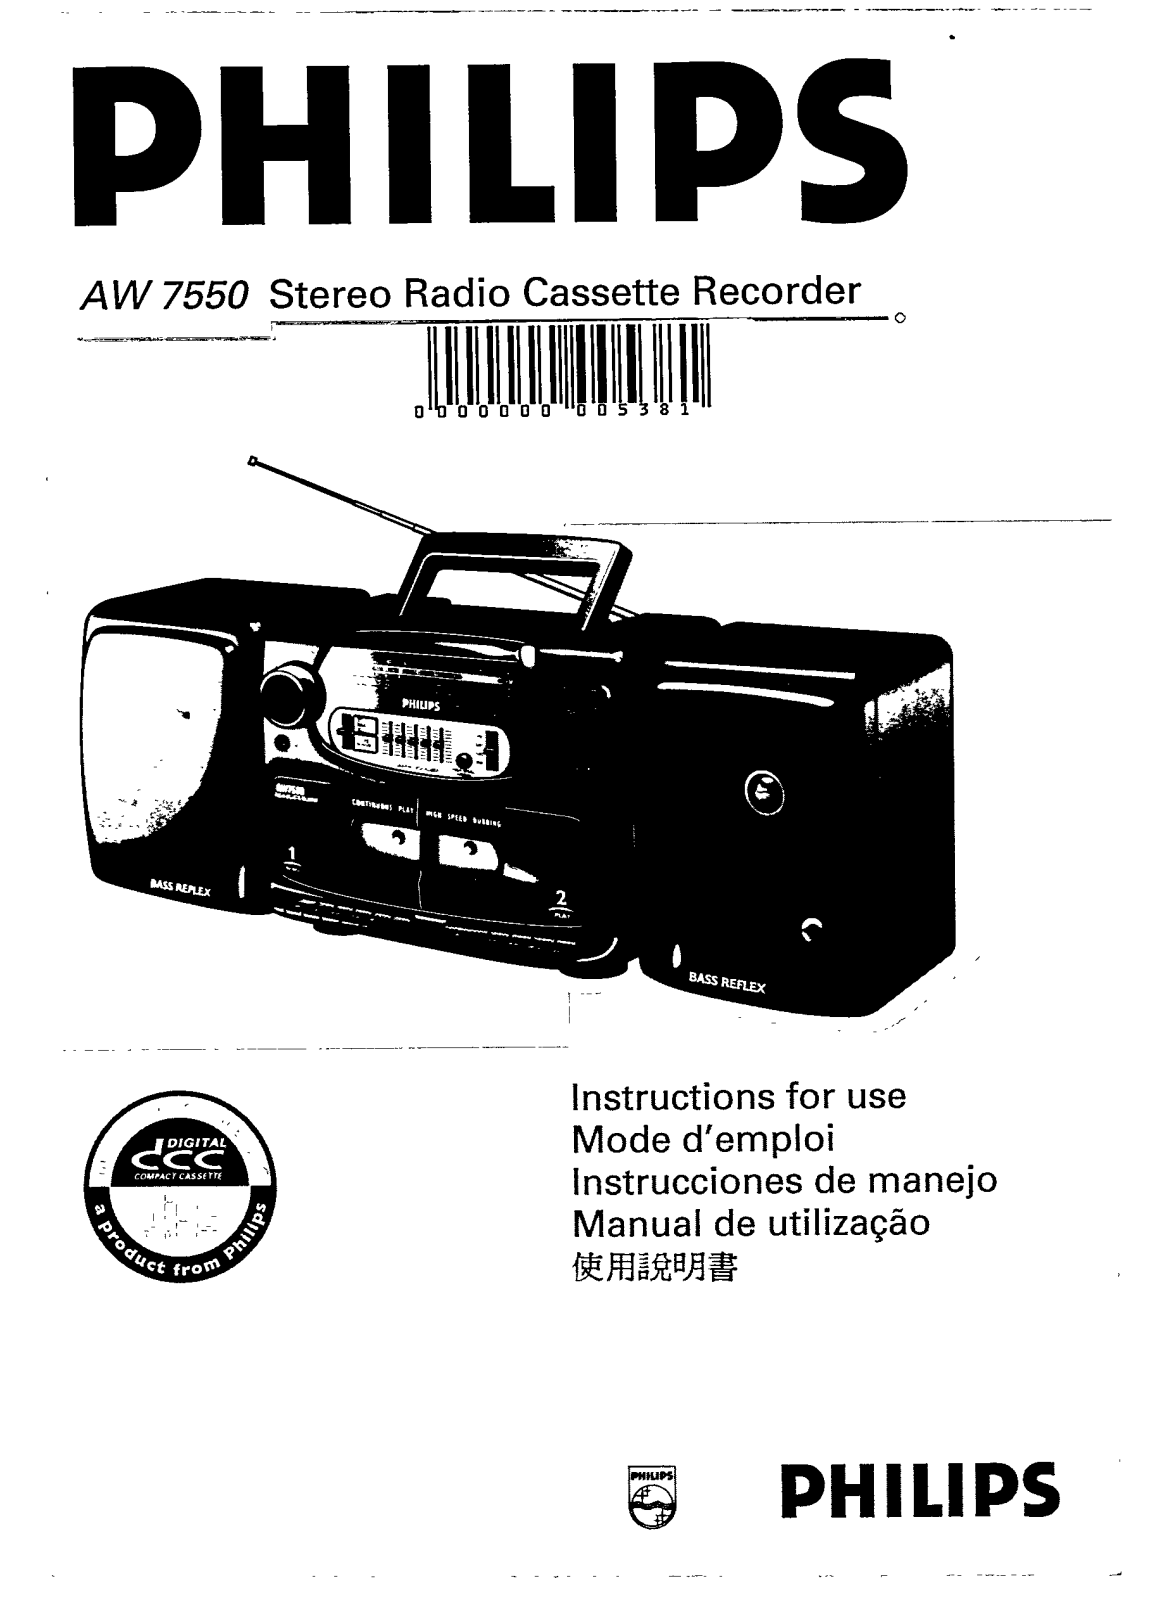 Philips AW 7550-01, AW 7550 User Manual